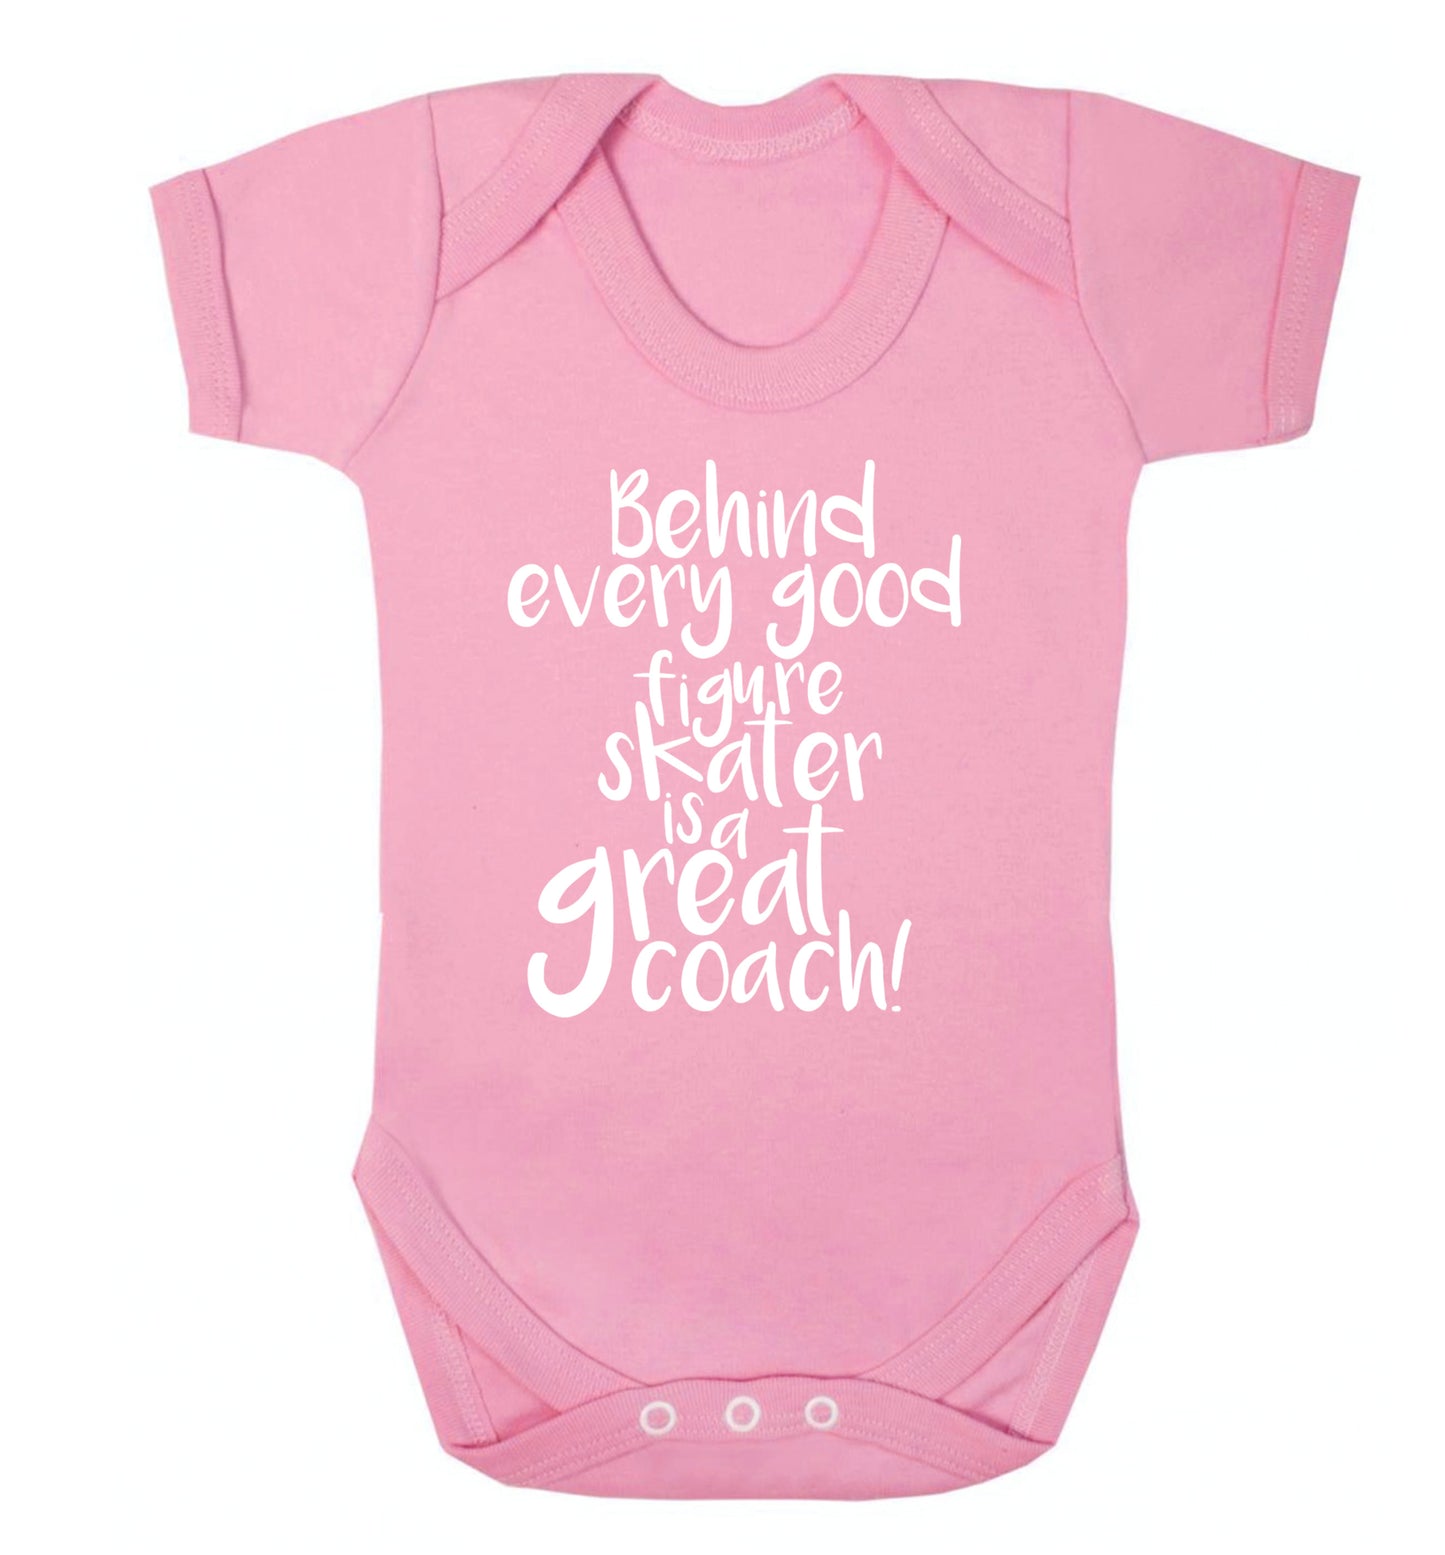 Behind every good figure skater is a great coach Baby Vest pale pink 18-24 months